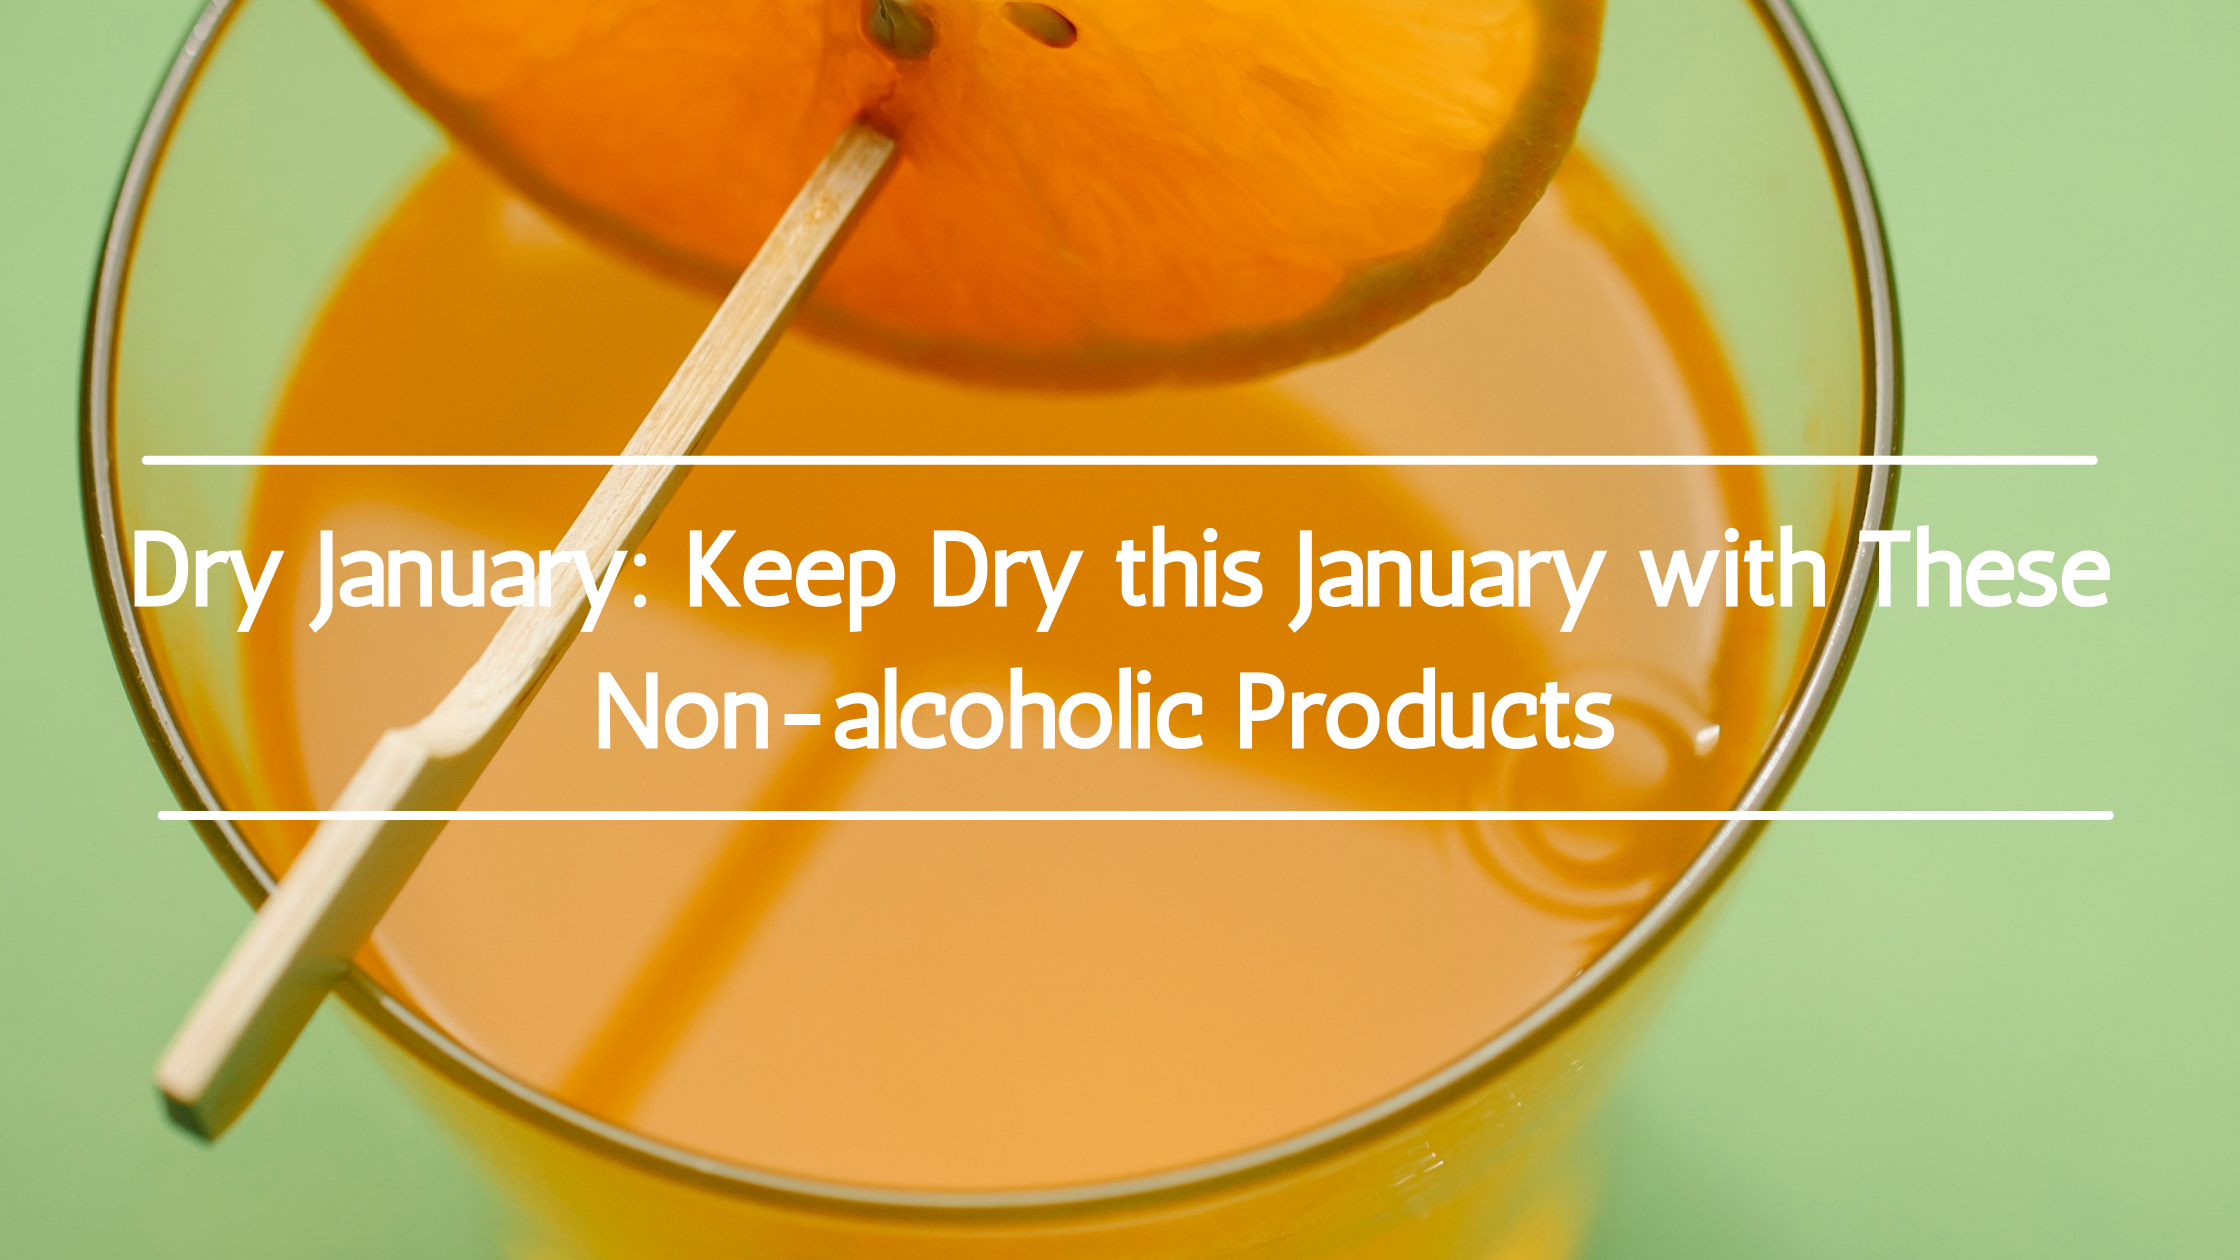 Dry January: Keep Dry this January with These Non-Alcoholic Products